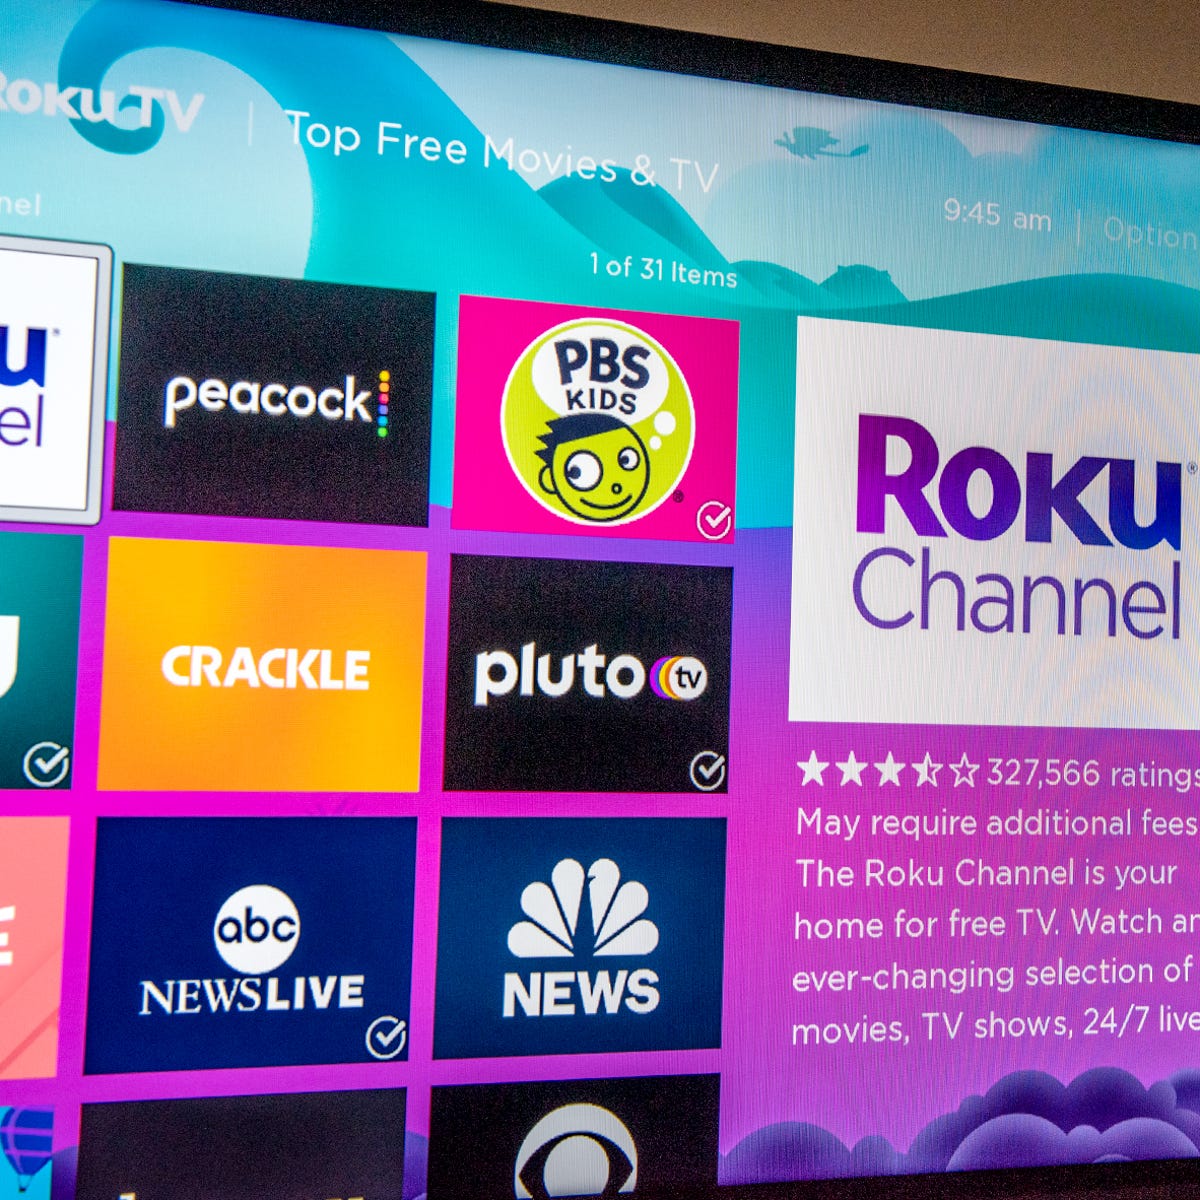 Roku is adding over 40 free channels, including local news